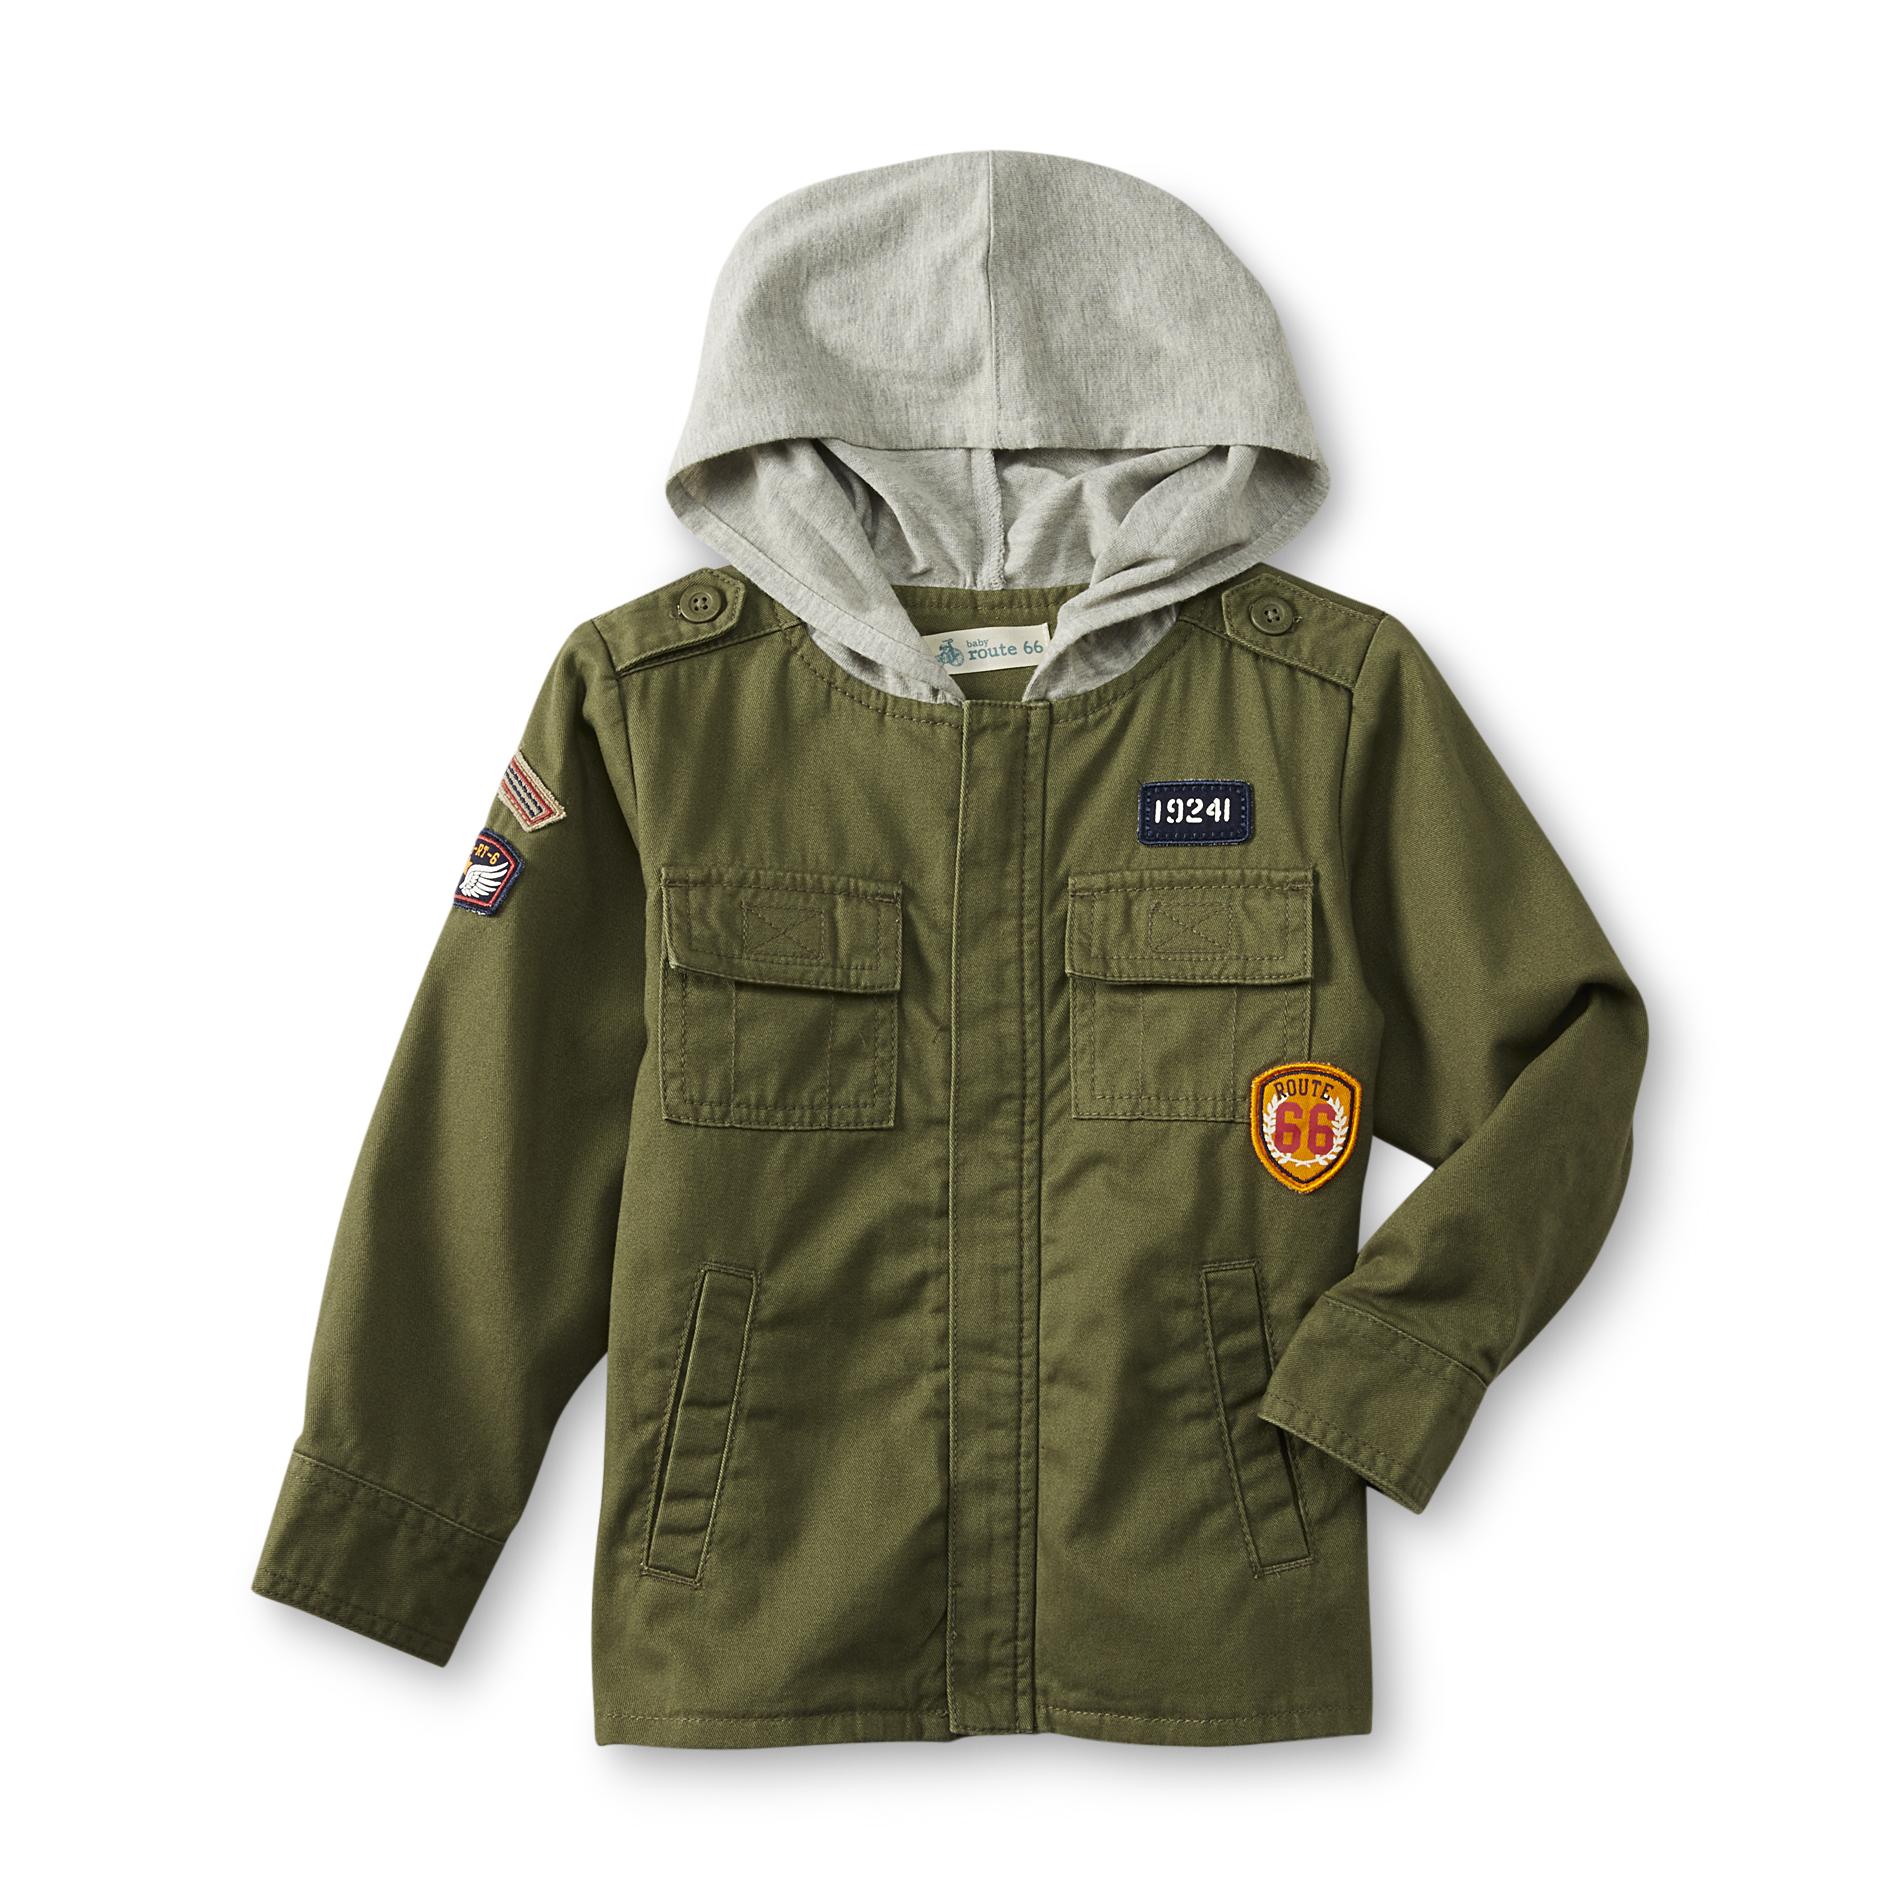 Route 66 Toddler Boy's Hooded Twill Military Jacket